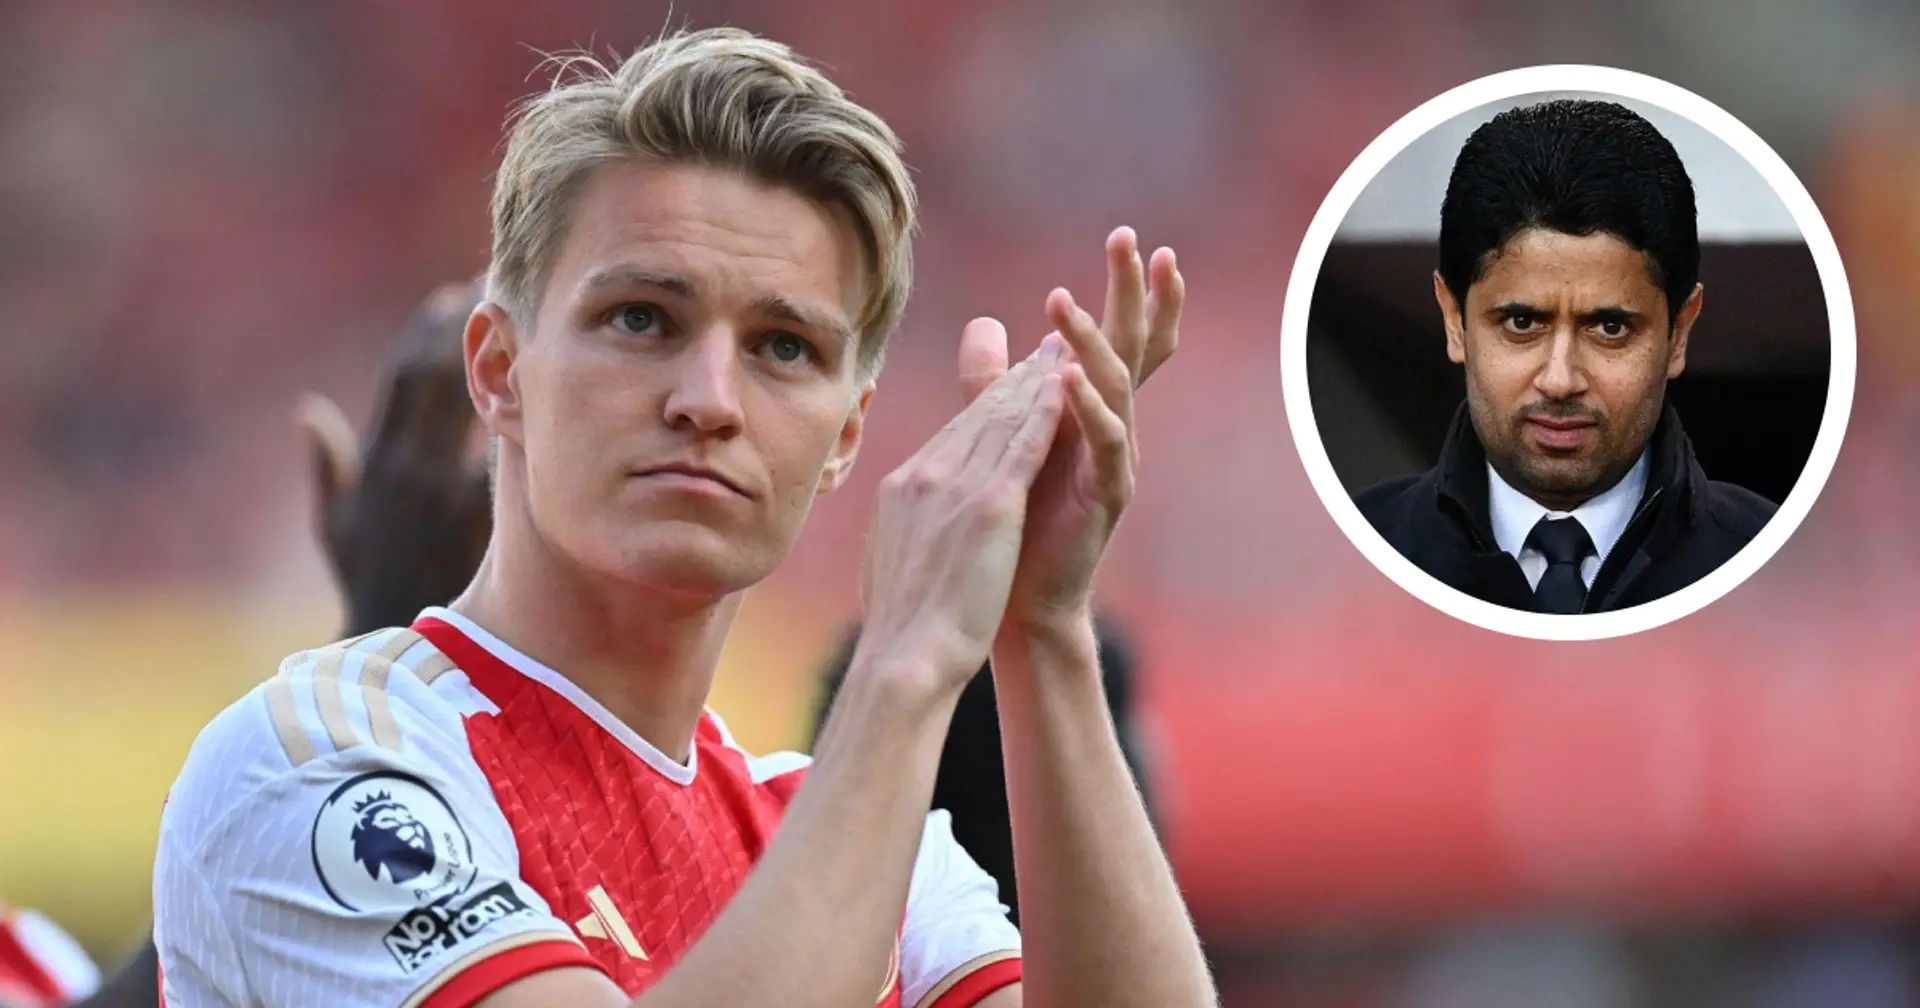 Martin Odegaard's stance on staying at Arsenal revealed amid Paris Saint-Germain interest (reliability: 4 stars)